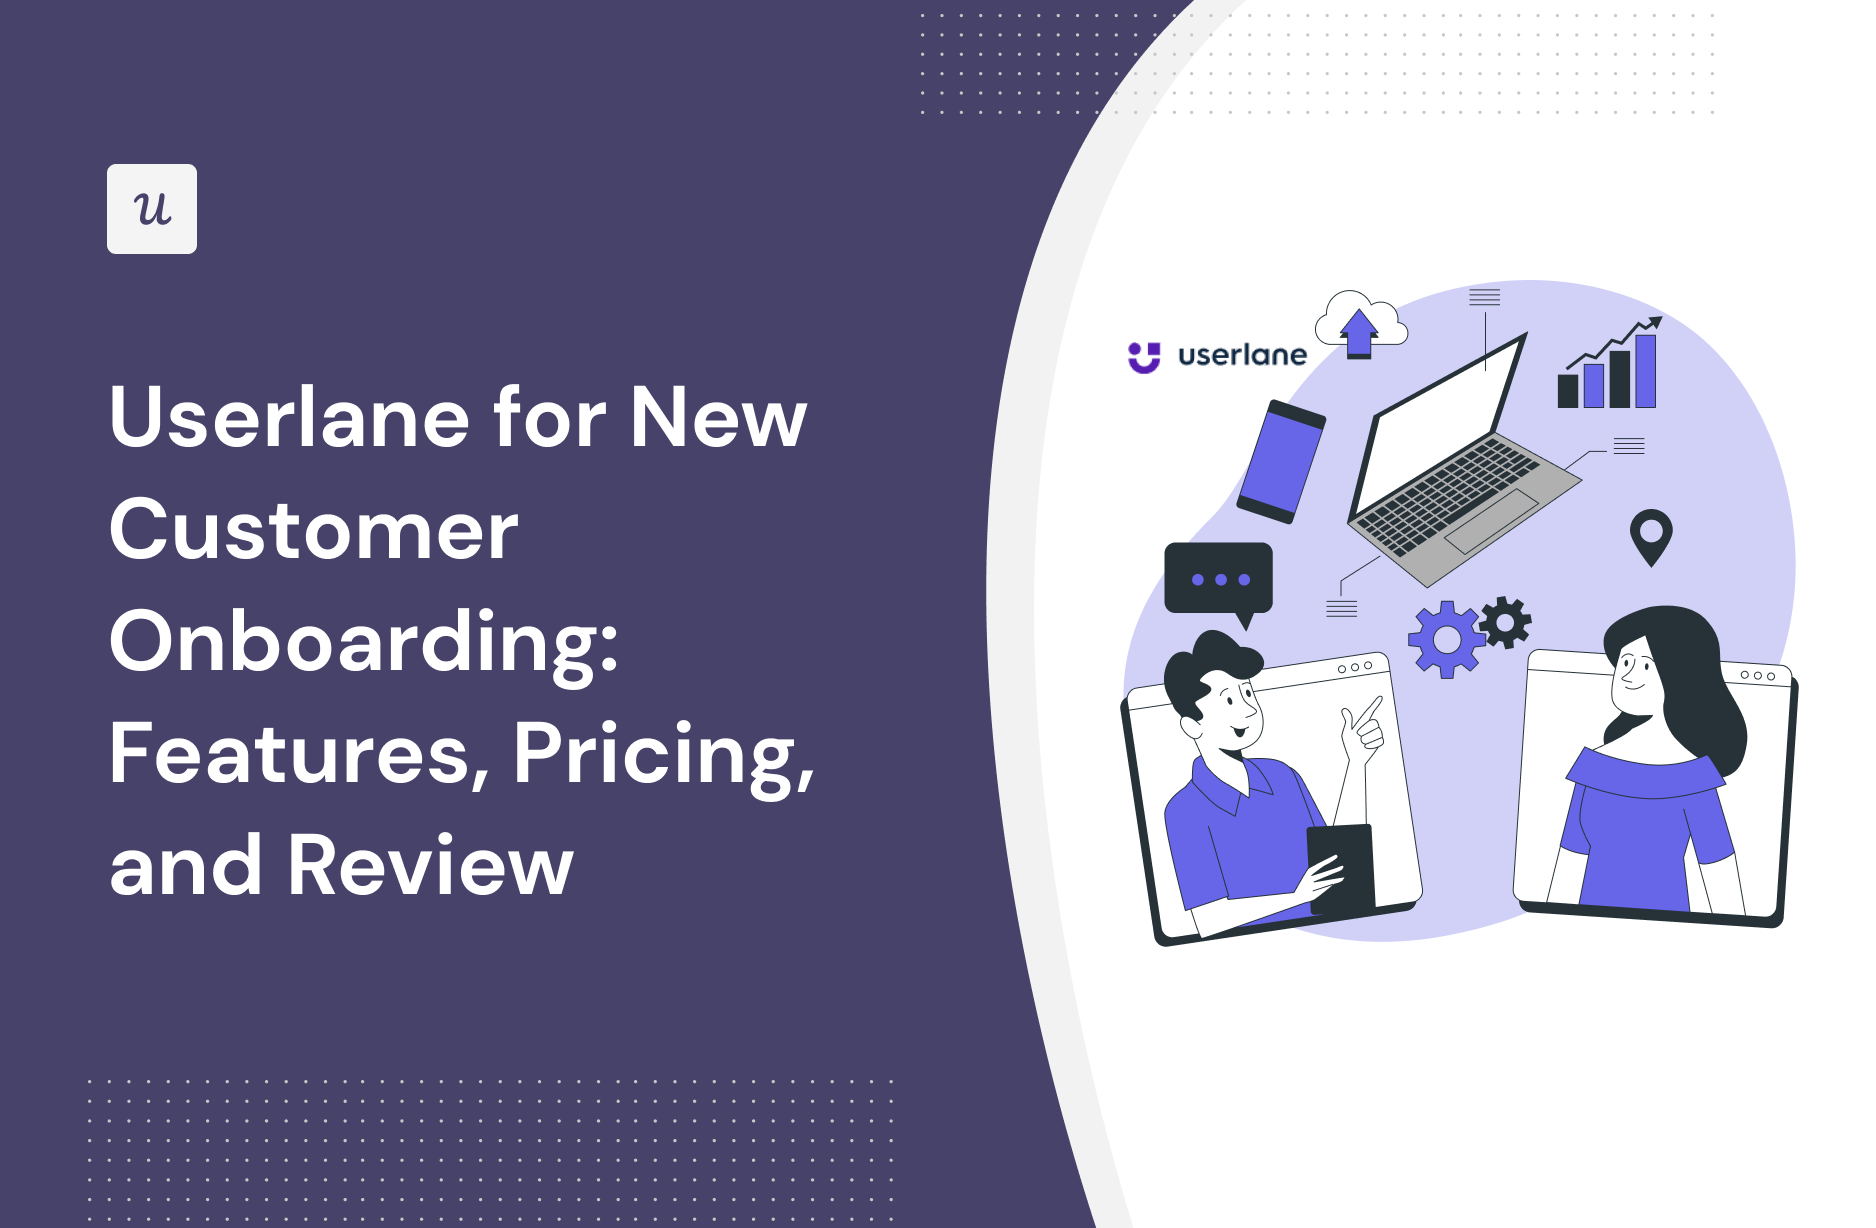 Userlane for New Customer Onboarding: Features, Pricing, and Review